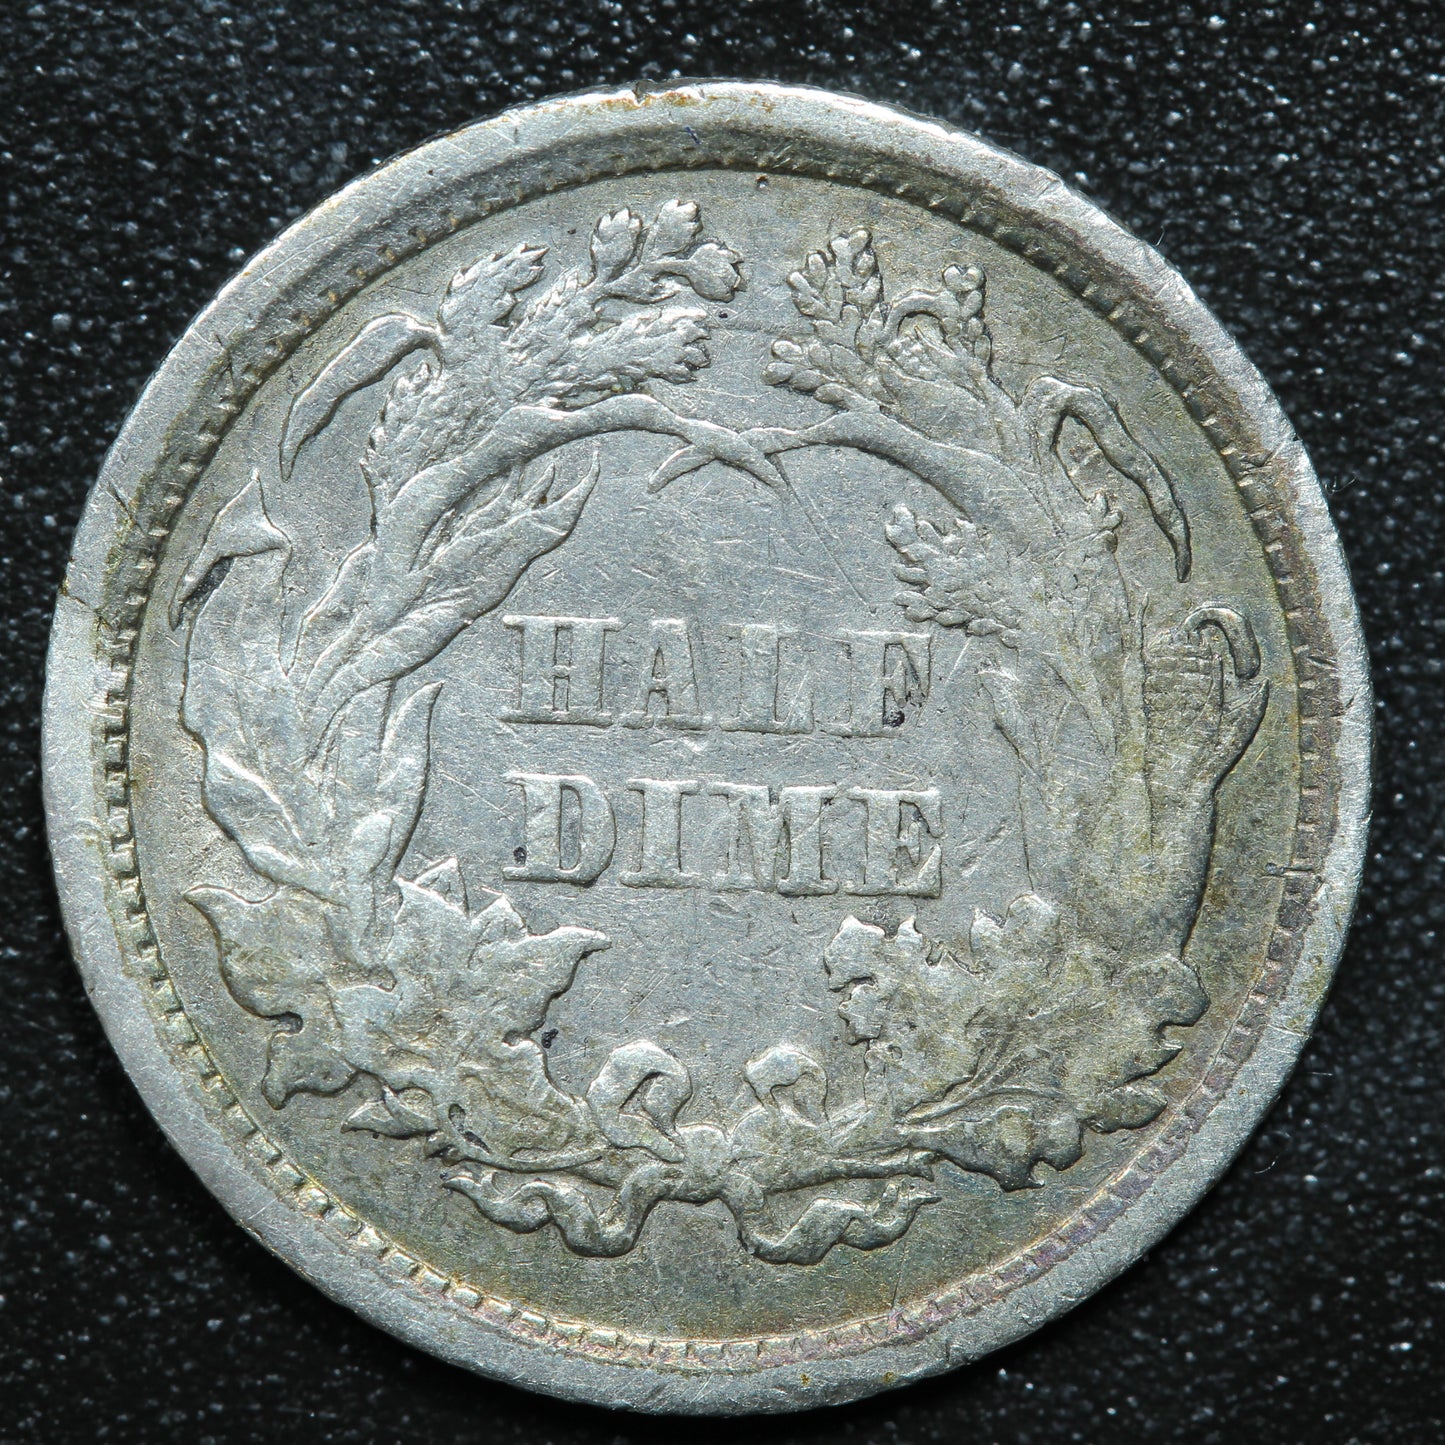 1862 Half Dime 5c Liberty Seated Arrows at Date